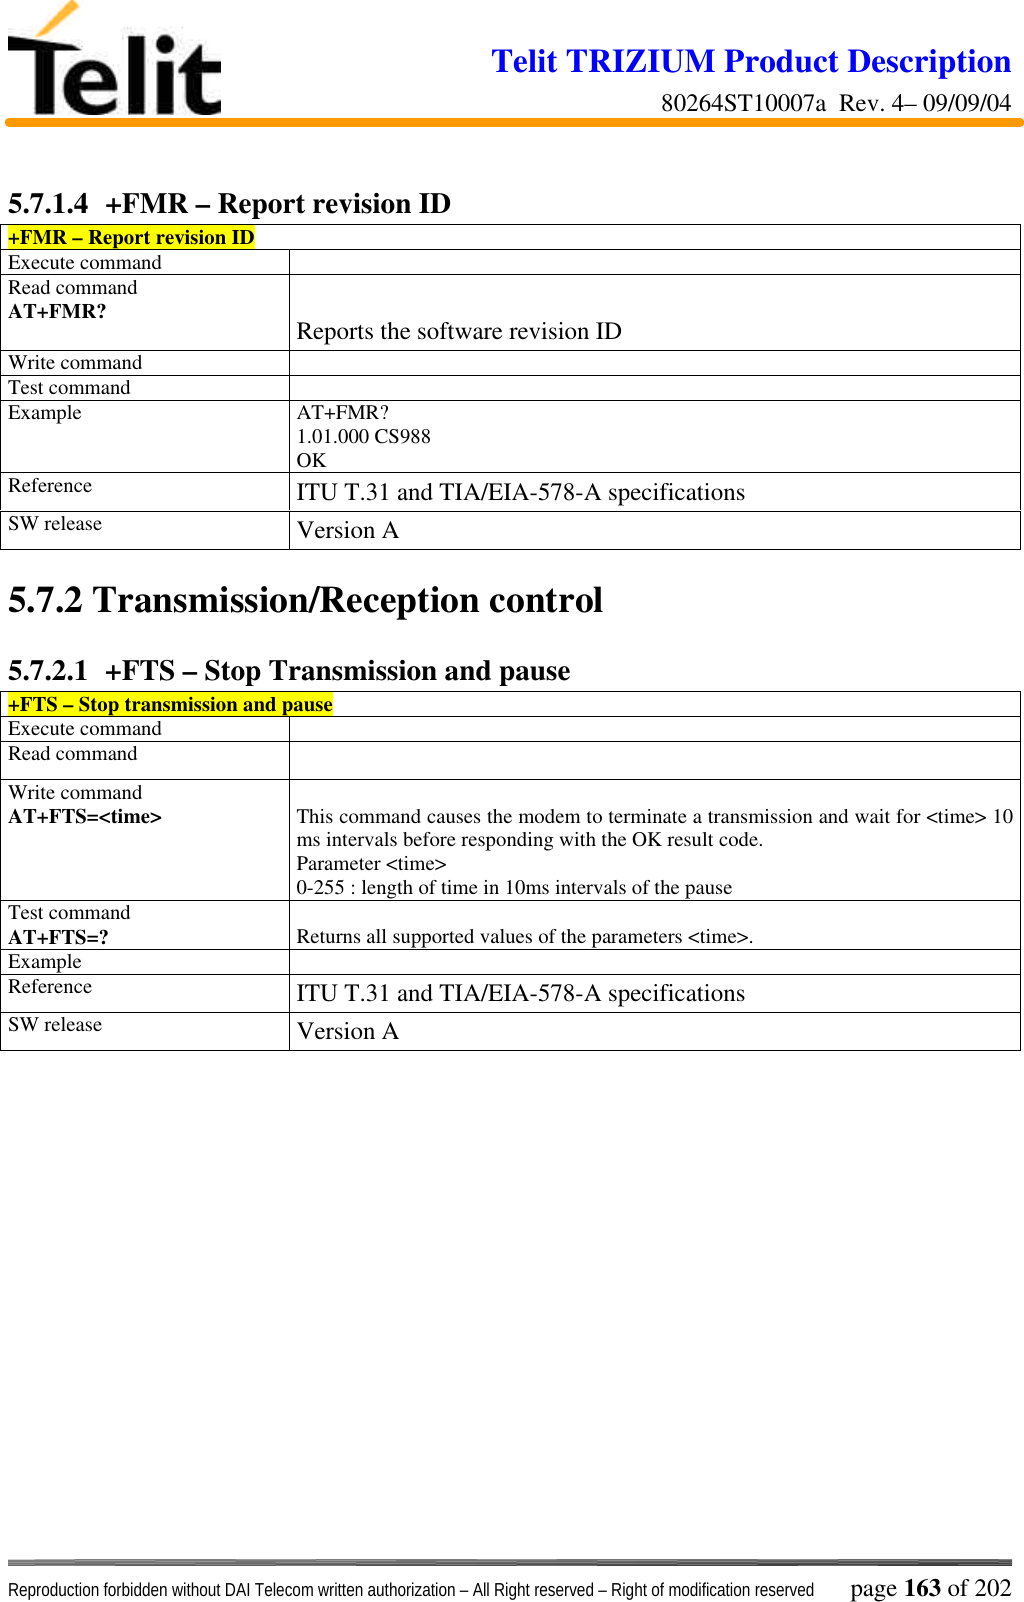 Telit TRIZIUM Product Description80264ST10007a  Rev. 4– 09/09/04Reproduction forbidden without DAI Telecom written authorization – All Right reserved – Right of modification reserved page 163 of 2025.7.1.4  +FMR – Report revision ID+FMR – Report revision IDExecute commandRead commandAT+FMR? Reports the software revision IDWrite commandTest commandExample AT+FMR?1.01.000 CS988OKReference ITU T.31 and TIA/EIA-578-A specificationsSW release Version A5.7.2  Transmission/Reception control5.7.2.1  +FTS – Stop Transmission and pause+FTS – Stop transmission and pauseExecute commandRead commandWrite commandAT+FTS=&lt;time&gt; This command causes the modem to terminate a transmission and wait for &lt;time&gt; 10ms intervals before responding with the OK result code.Parameter &lt;time&gt;0-255 : length of time in 10ms intervals of the pauseTest commandAT+FTS=? Returns all supported values of the parameters &lt;time&gt;.ExampleReference ITU T.31 and TIA/EIA-578-A specificationsSW release Version A